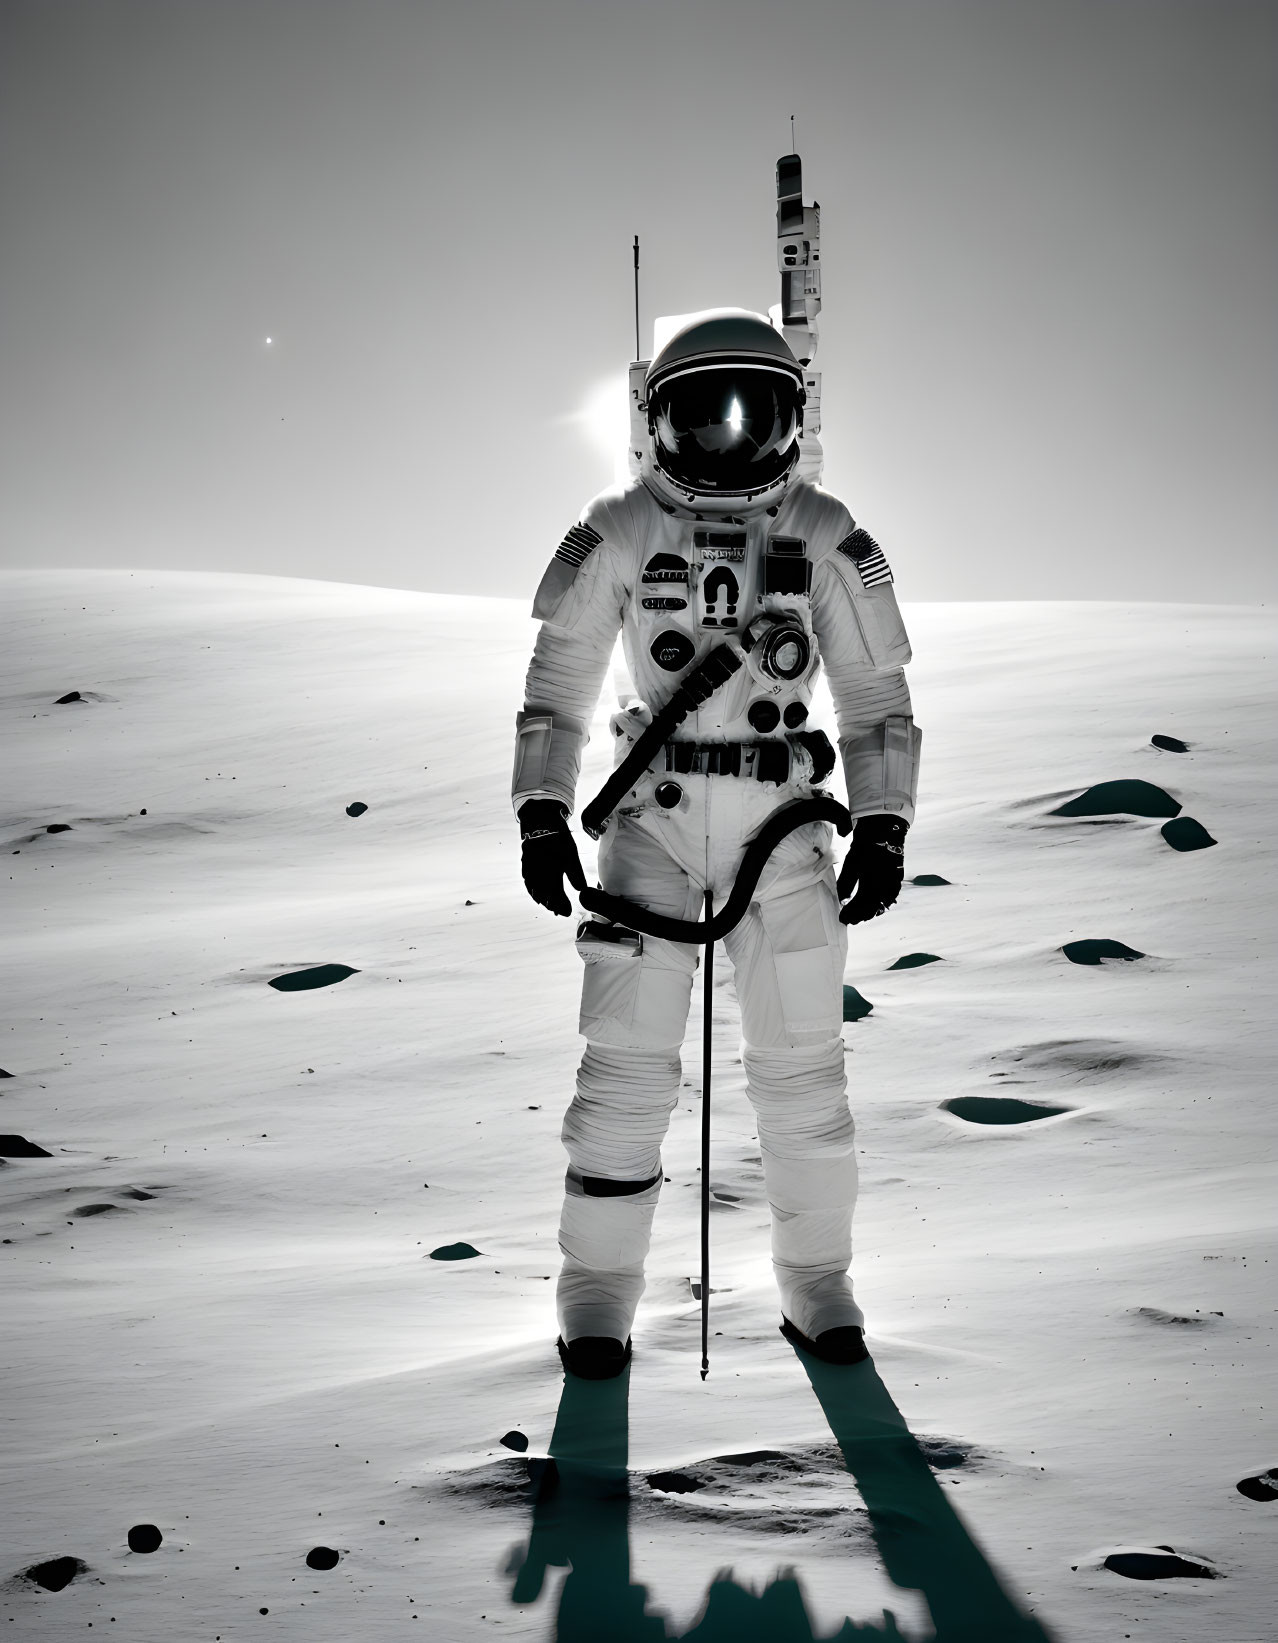 Astronaut in white space suit on lunar surface with Earth in background